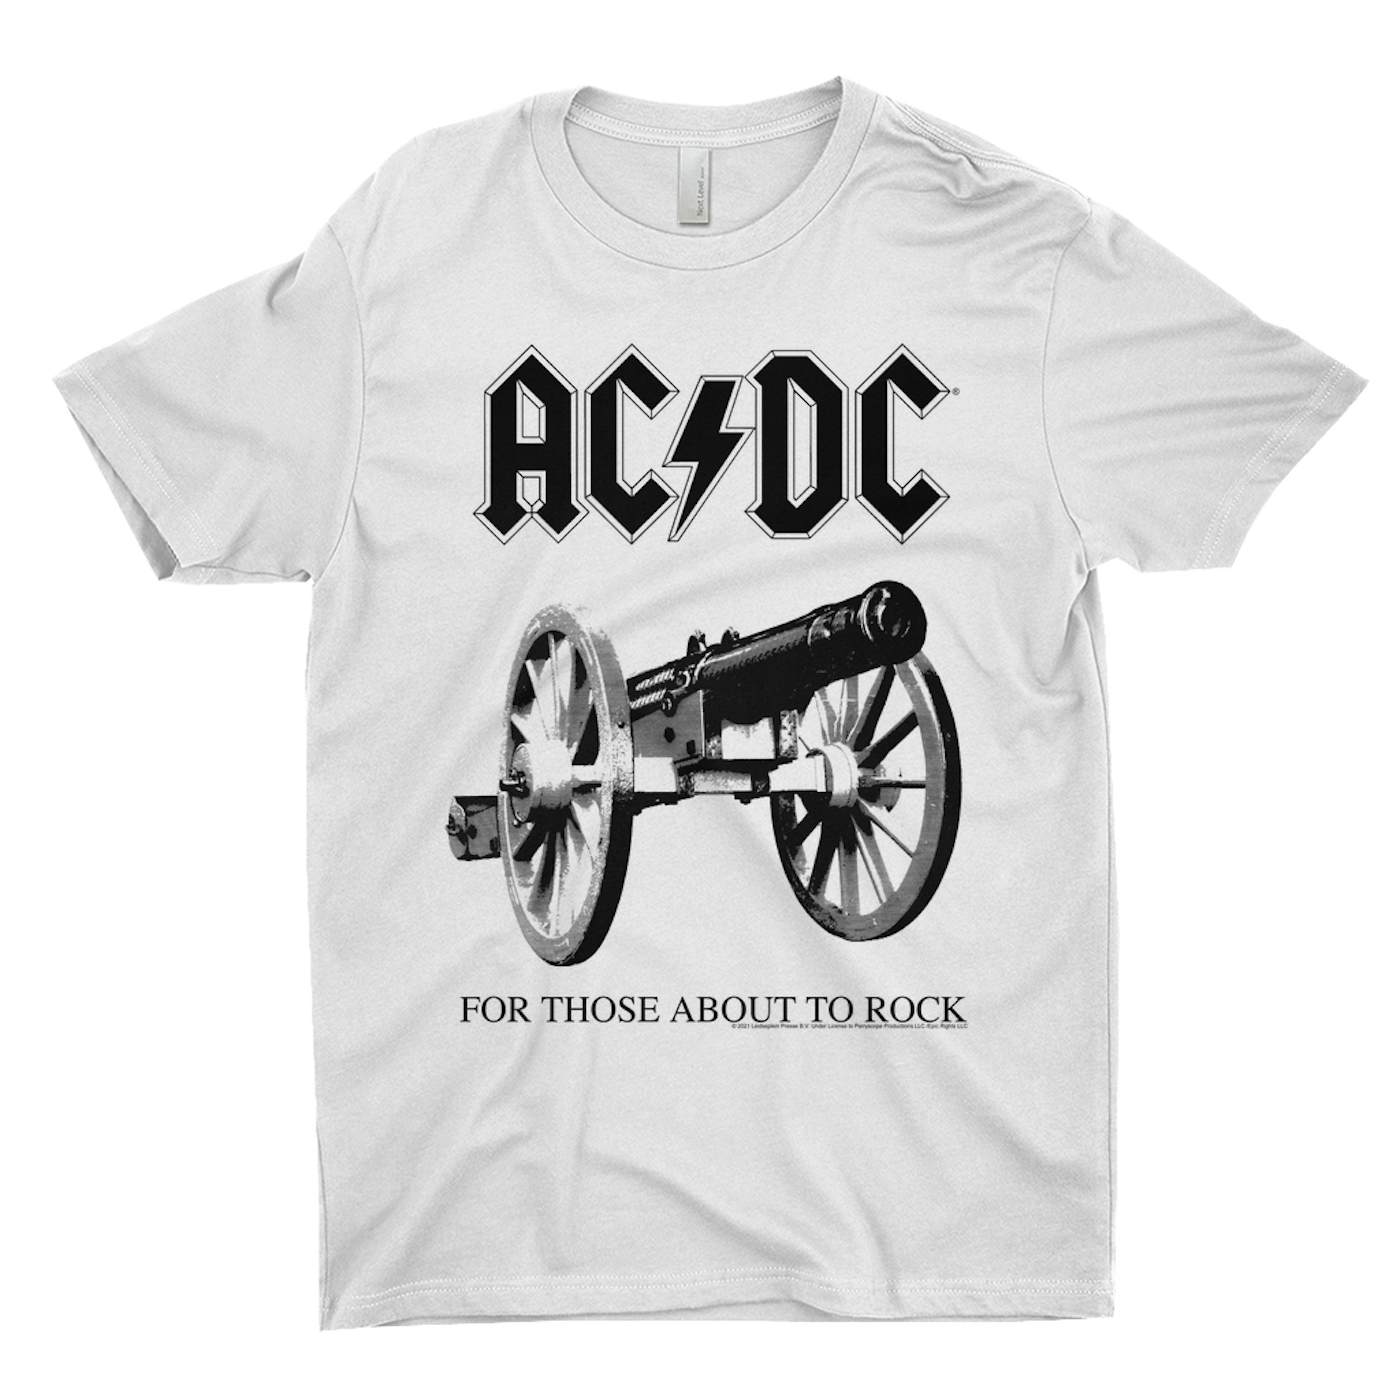 Shirt About Those Image Cannon AC/DC To For T-Shirt | Rock Black